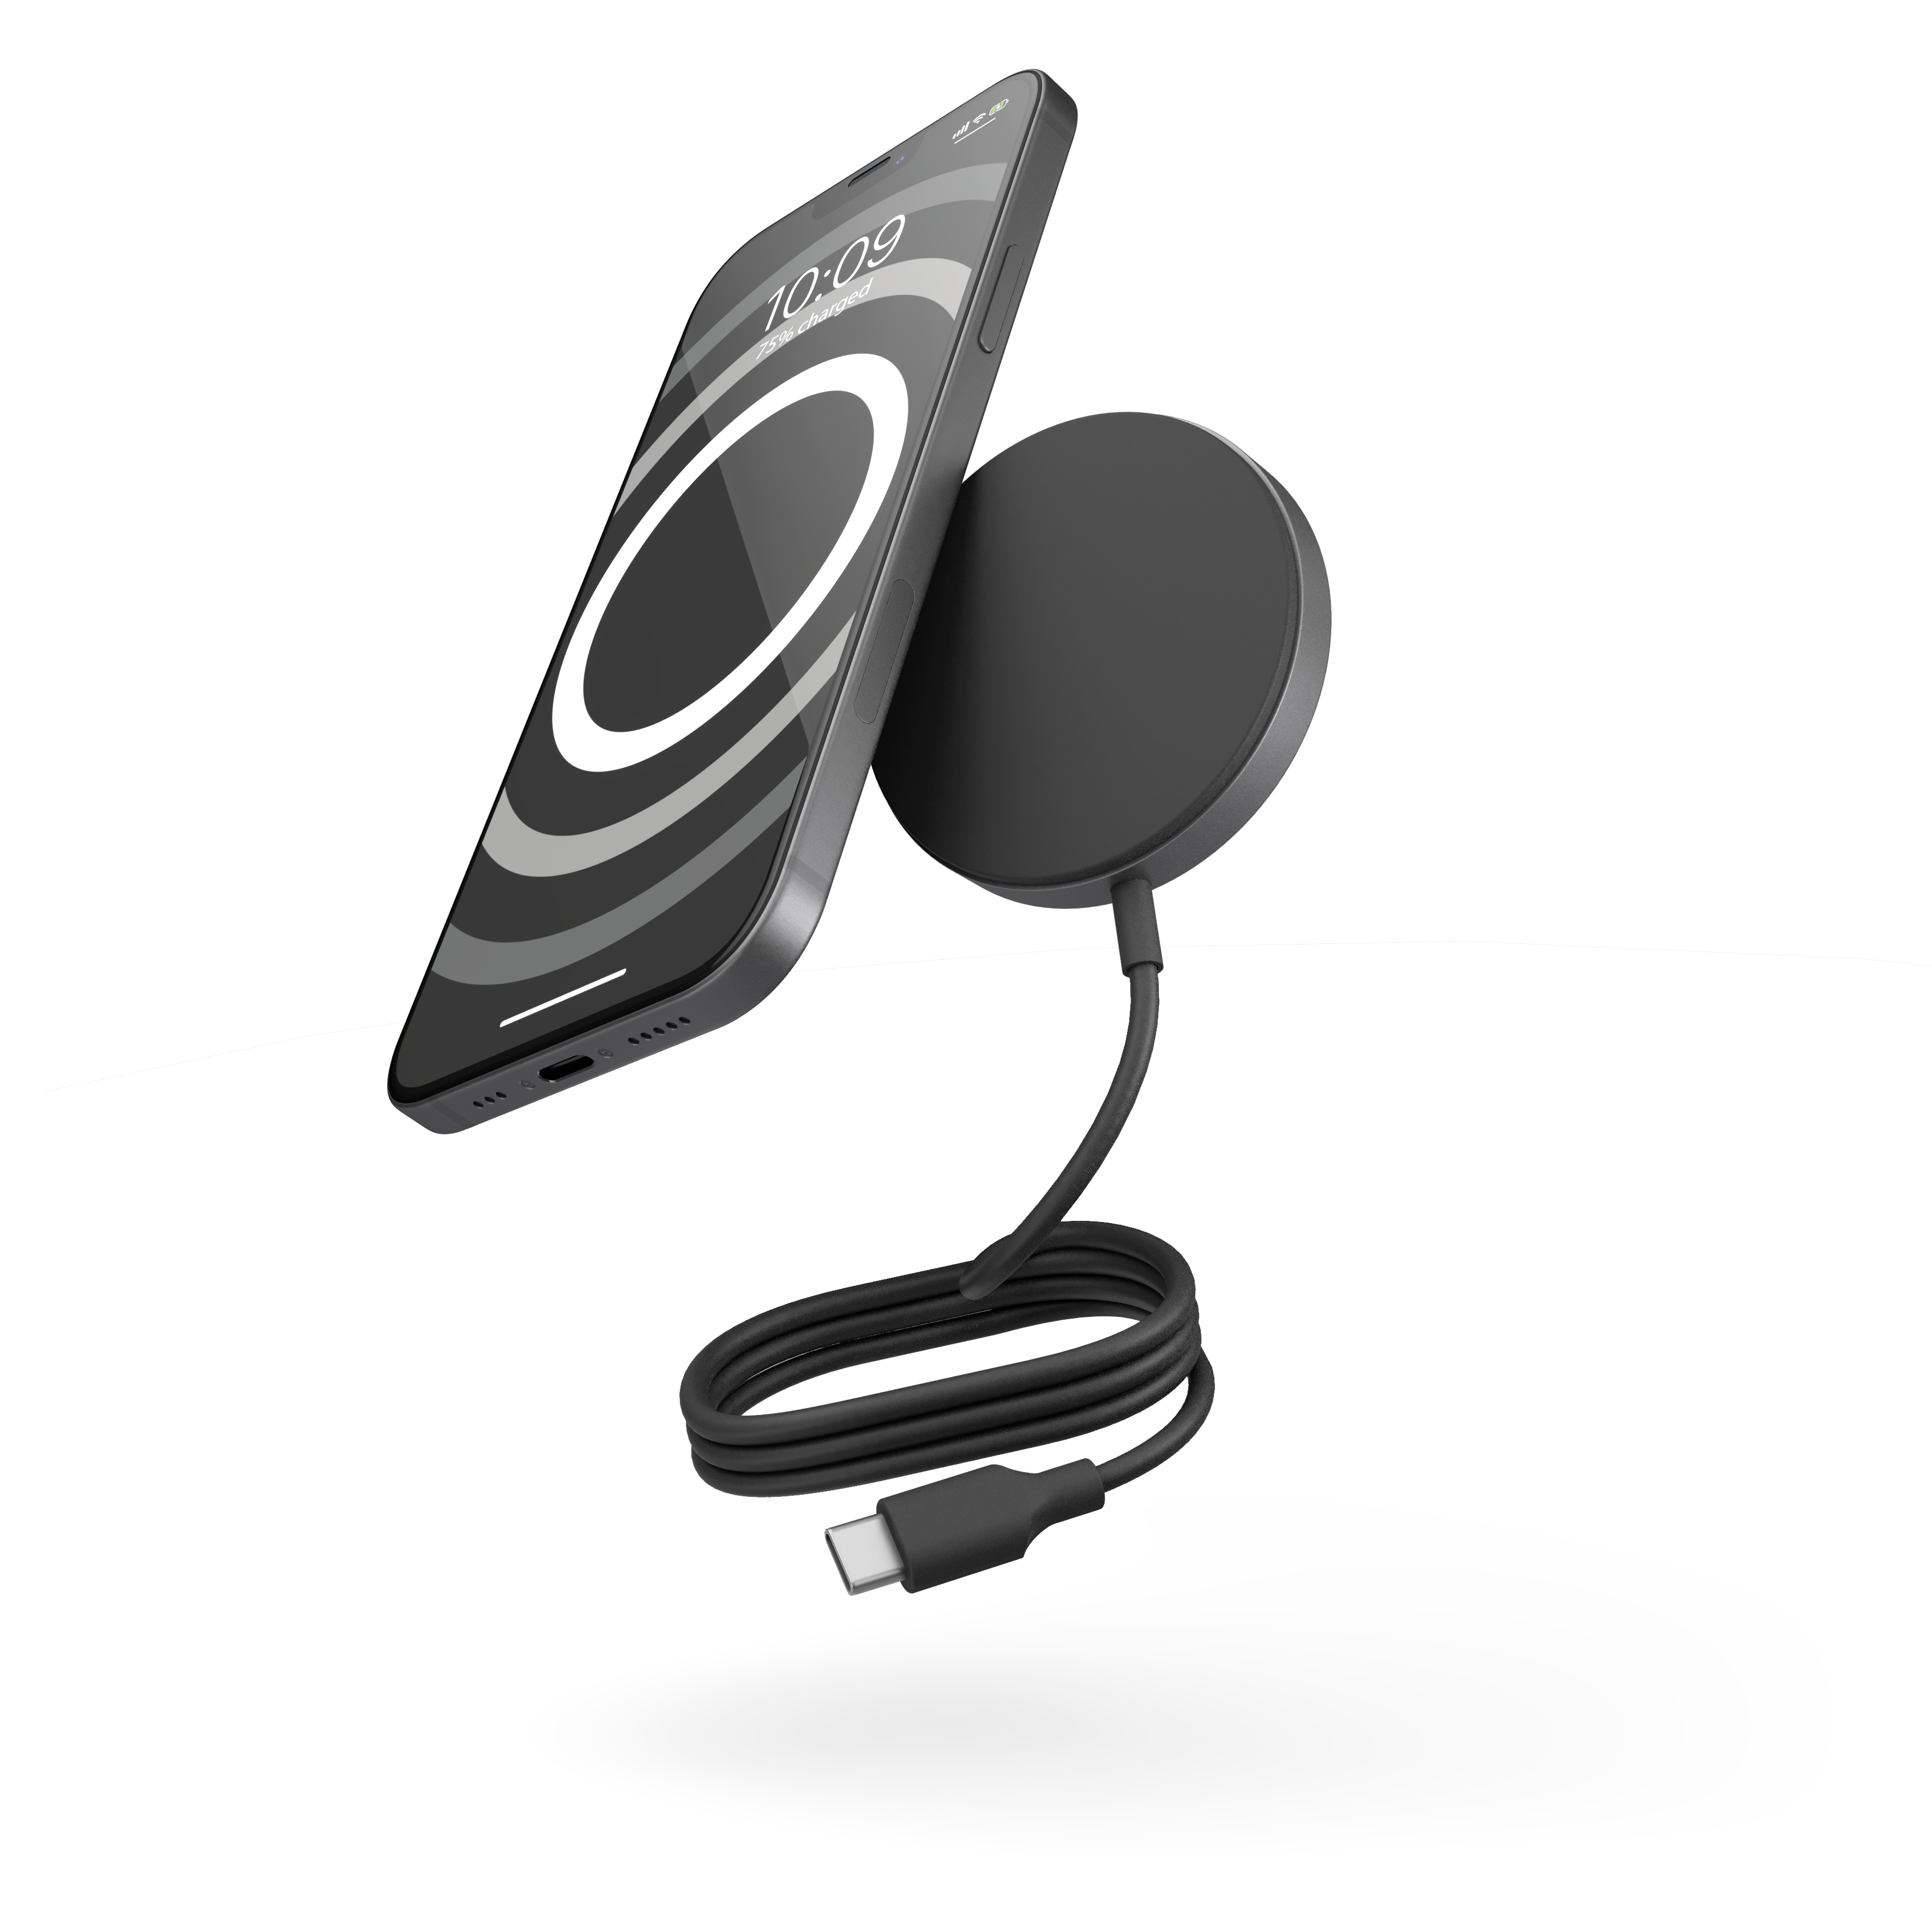 Qi2 wireless charger